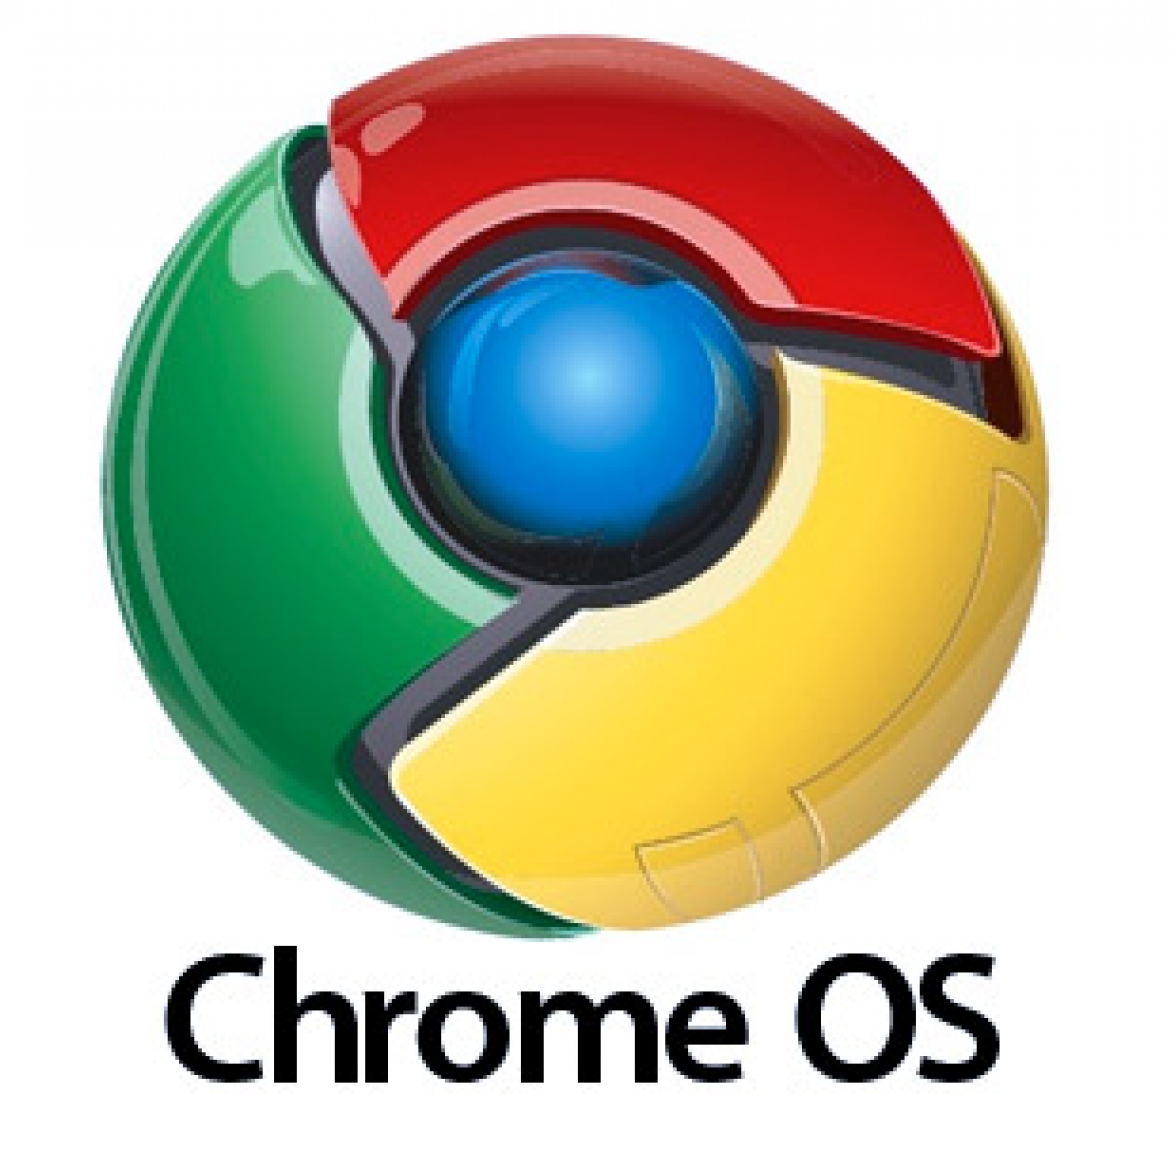 Chrome os clipart download